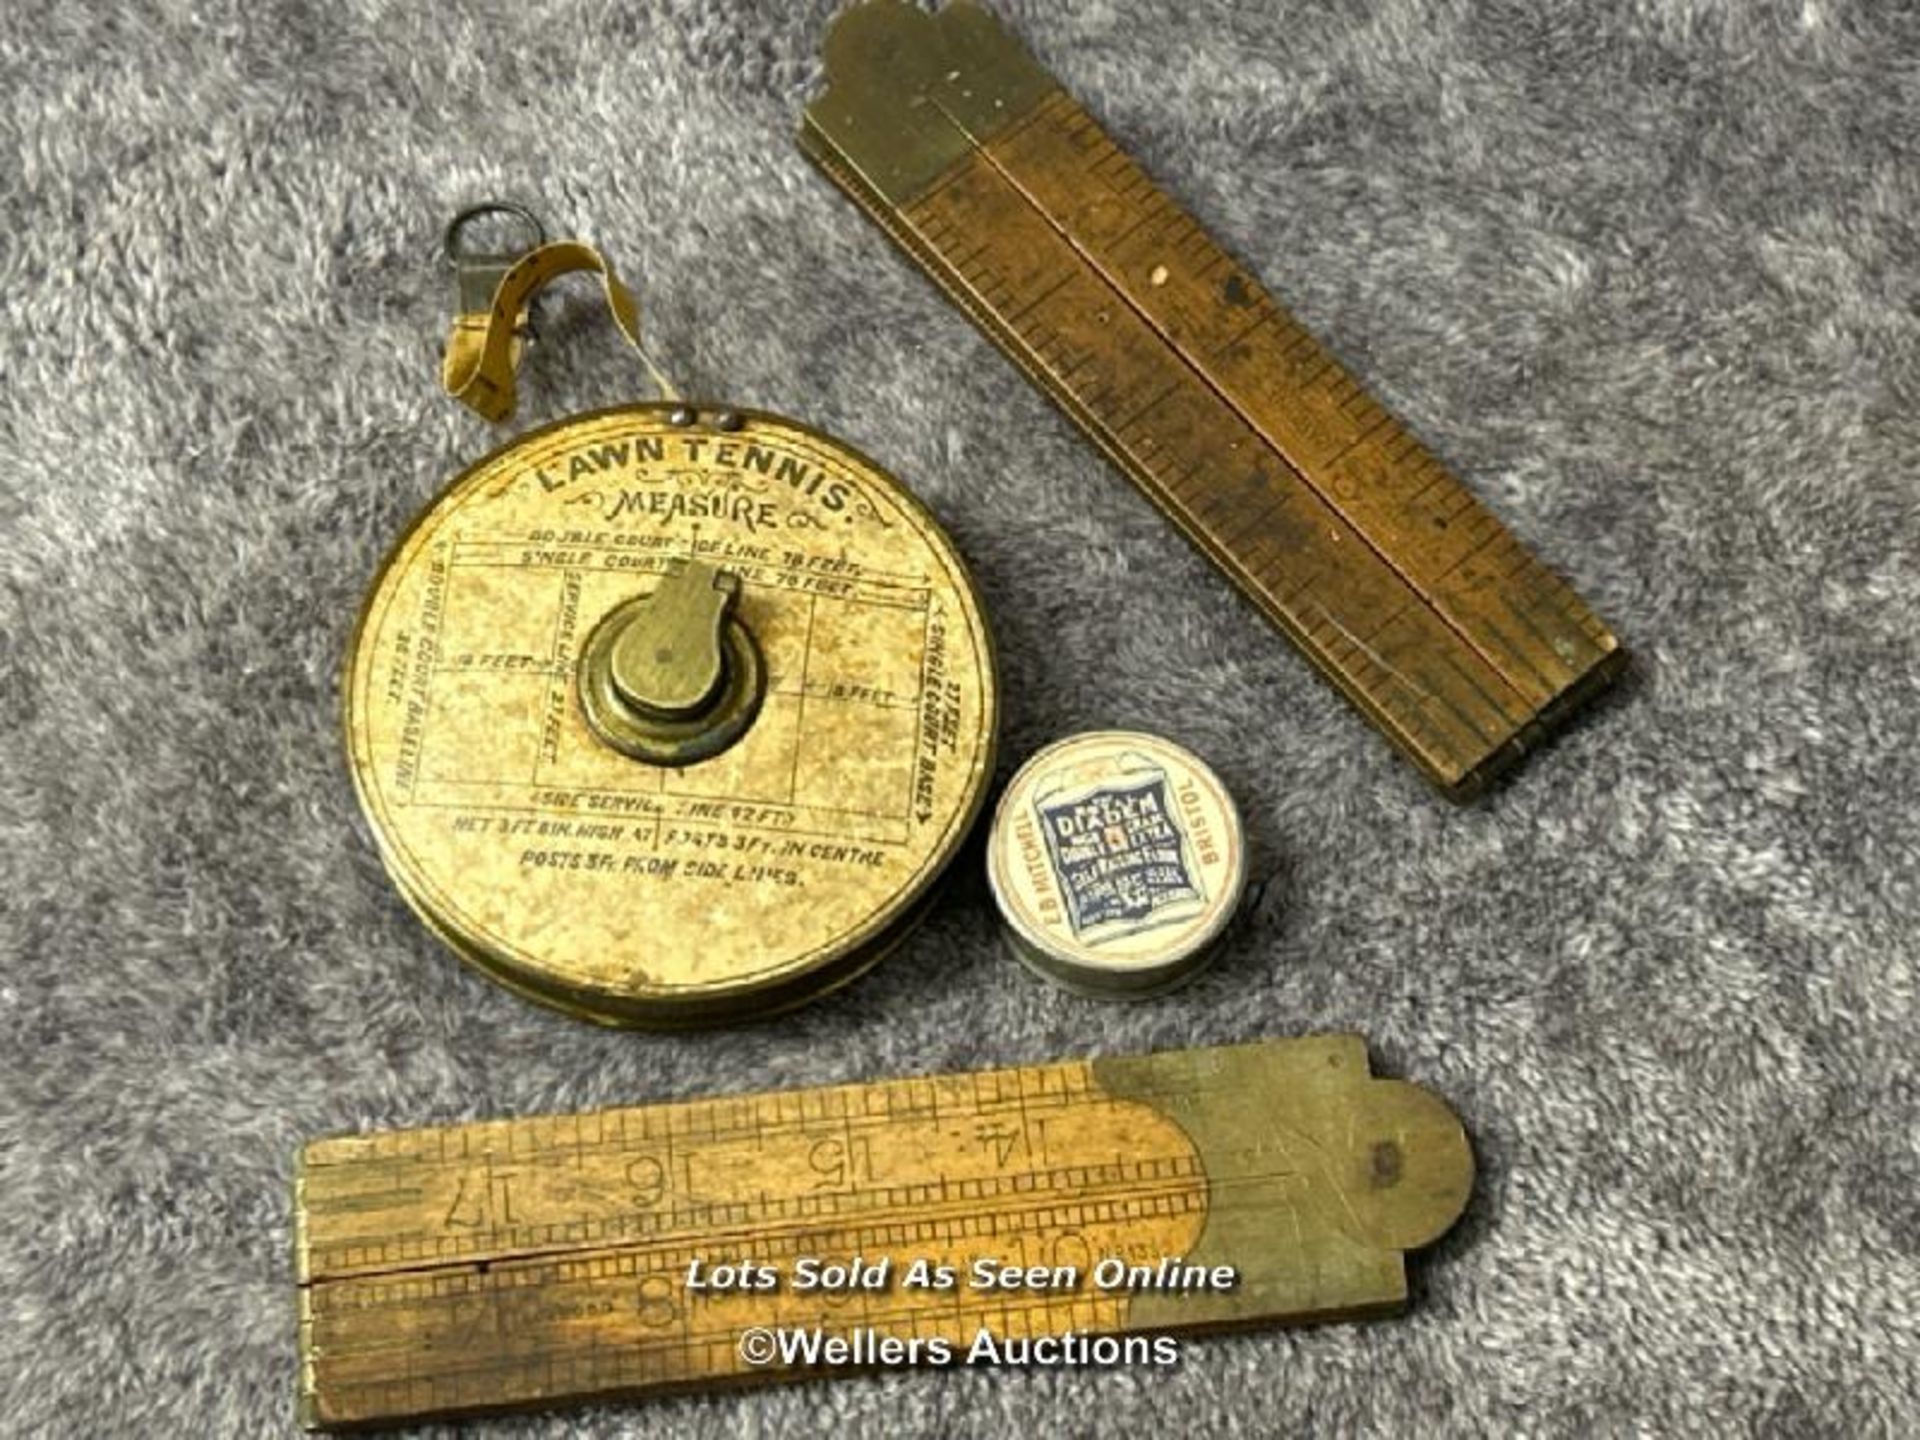 Vintage brass lawn tennis measure, small E.B Mitchell 'The Royal Diadem' tape measure and two